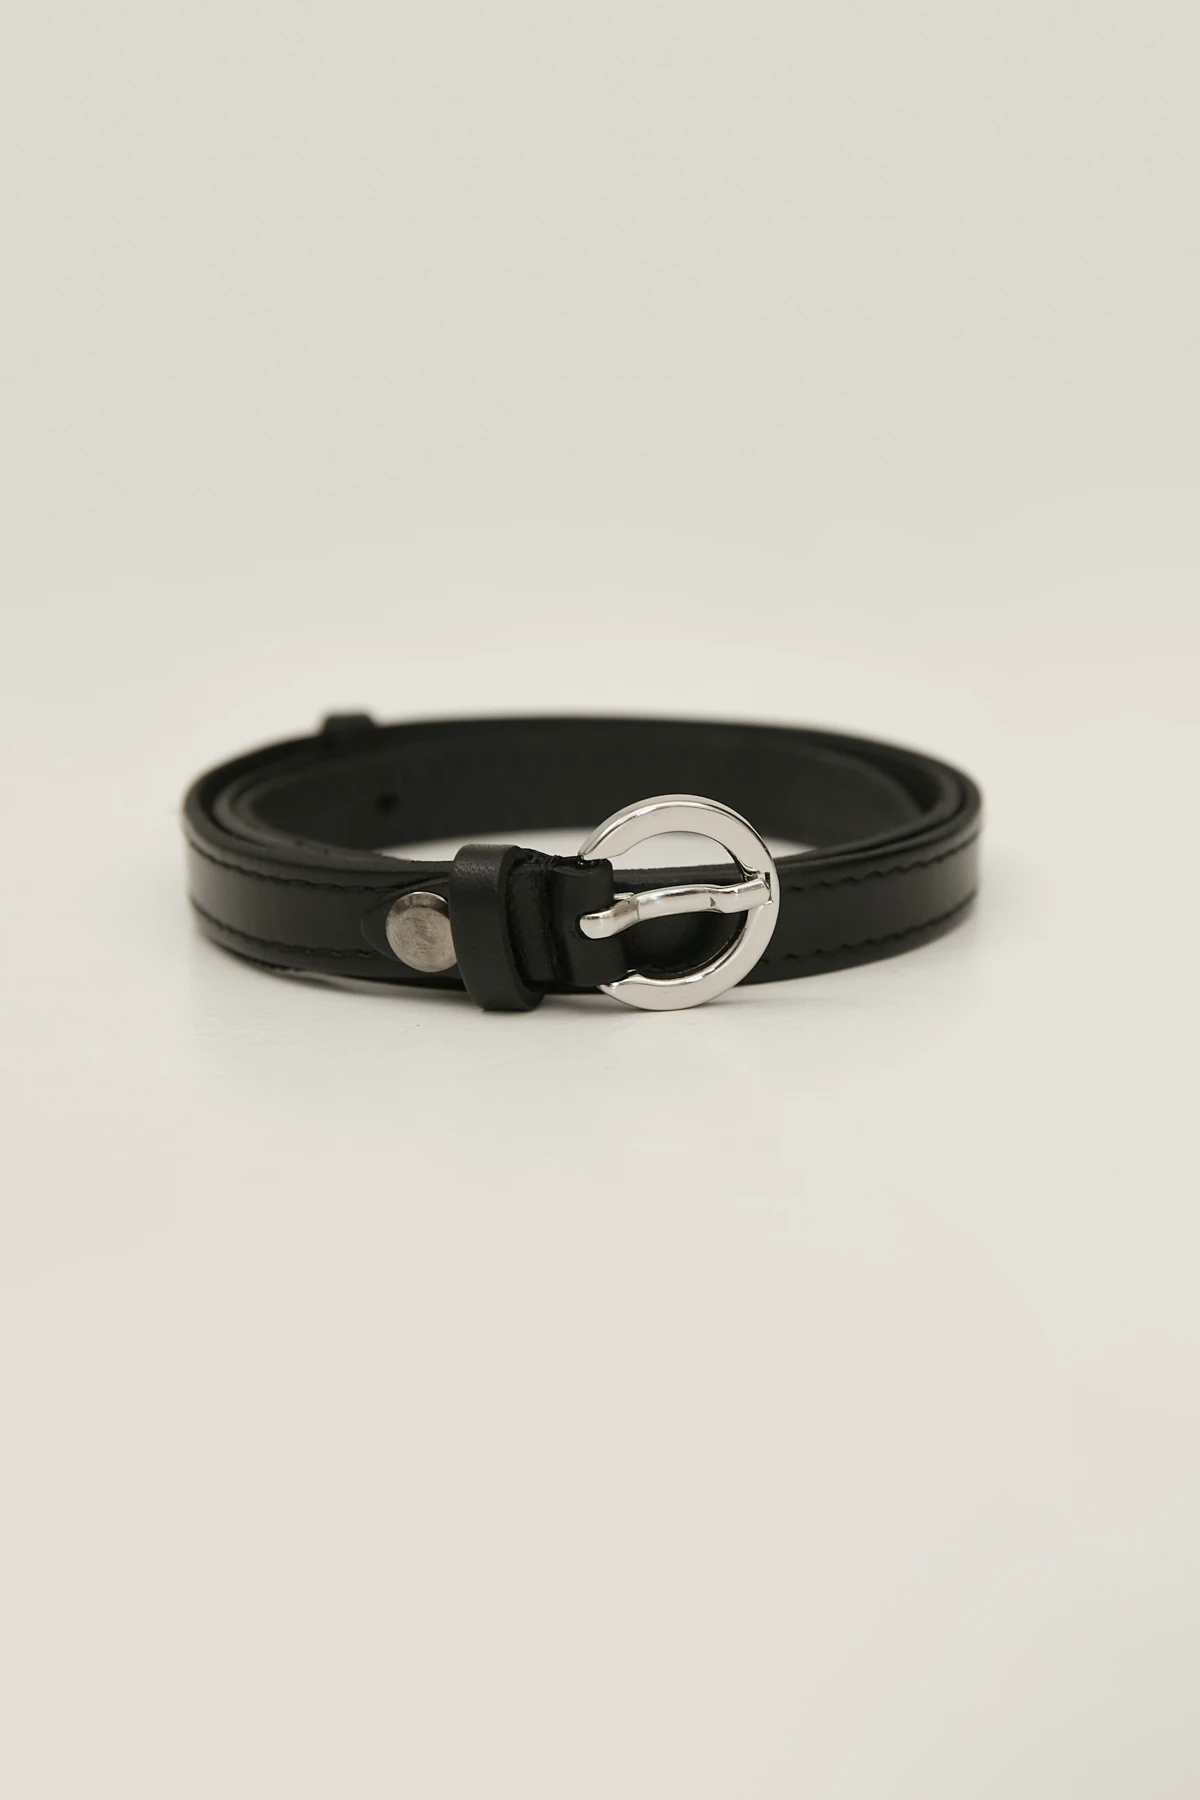 Black thin genuine leather belt with a silver metallic buckle, photo 1